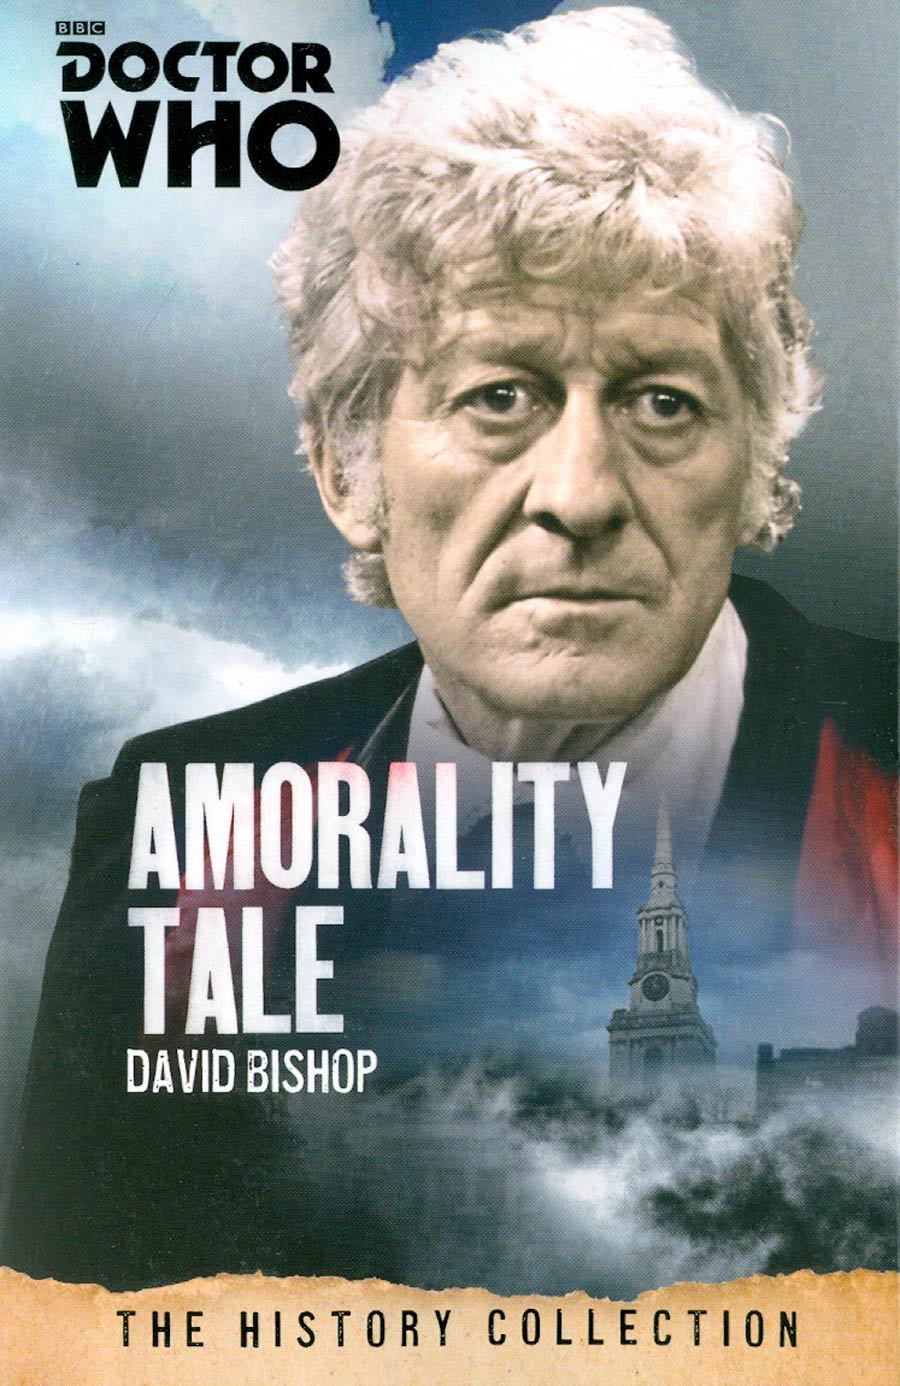 Doctor Who History Collection Amorality Tale SC